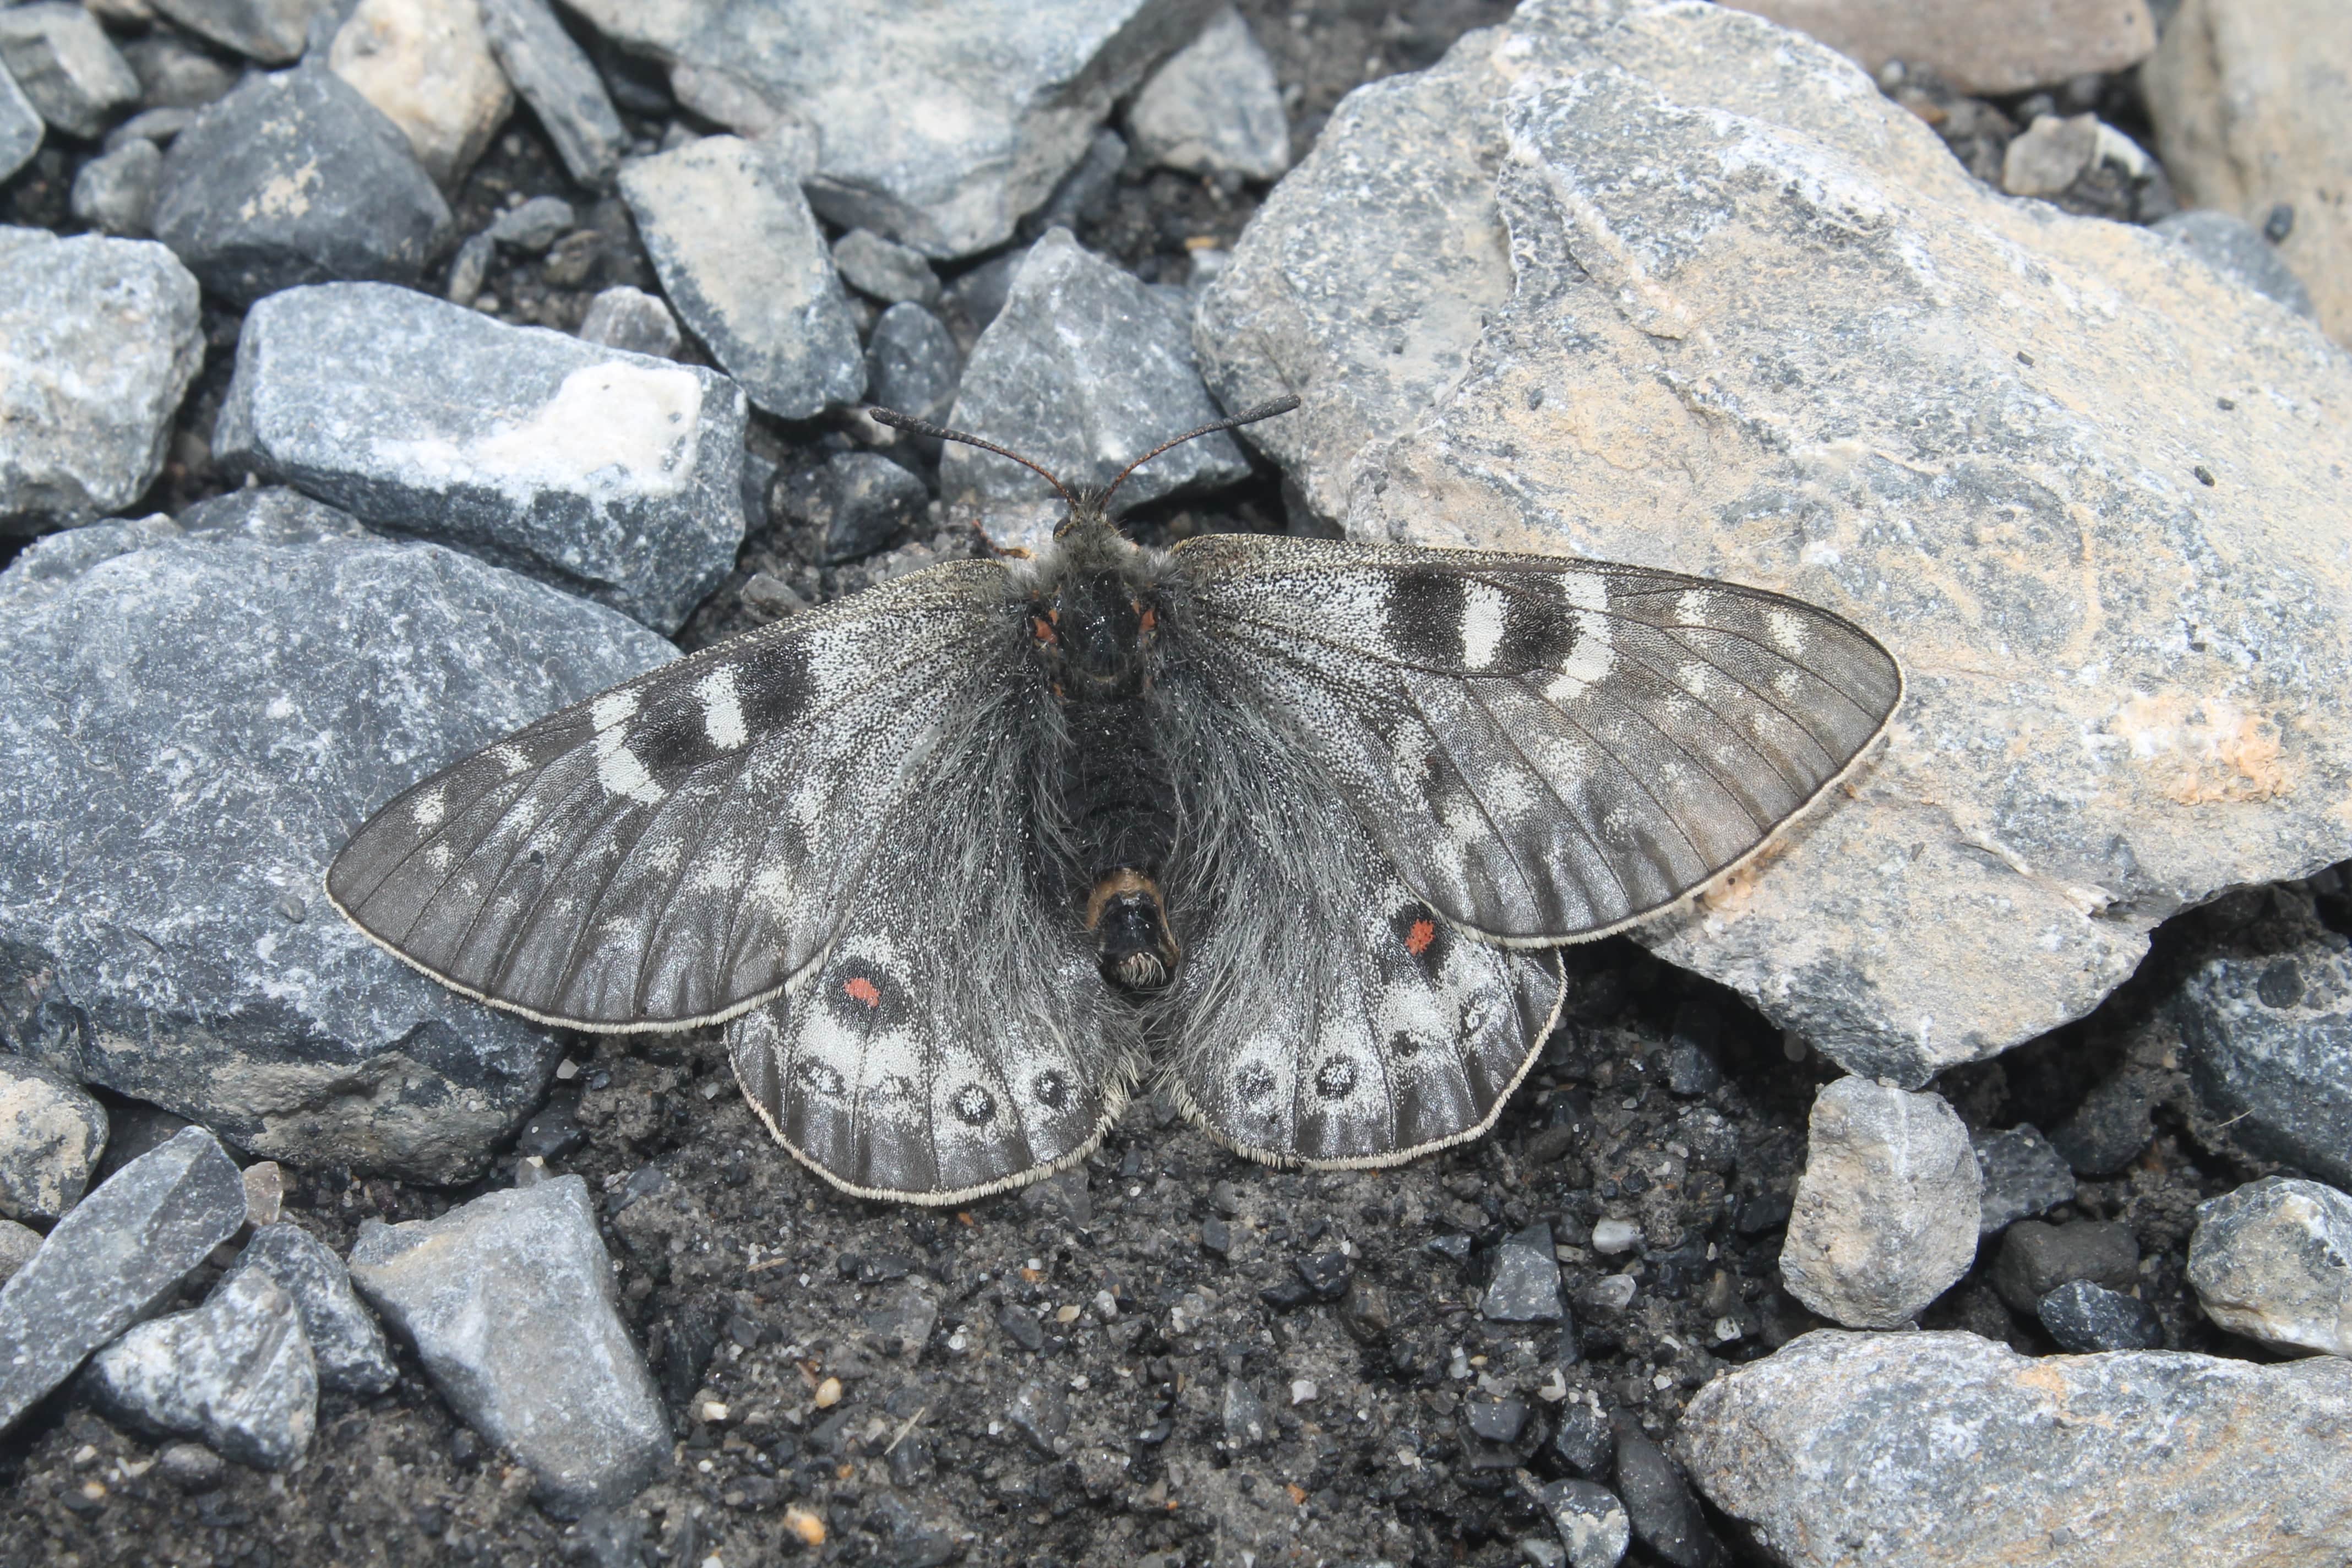 Butterﬂies of the Trans-Himalayan Region: Spatial Distribution, Status and Strengthening Conservation Approaches